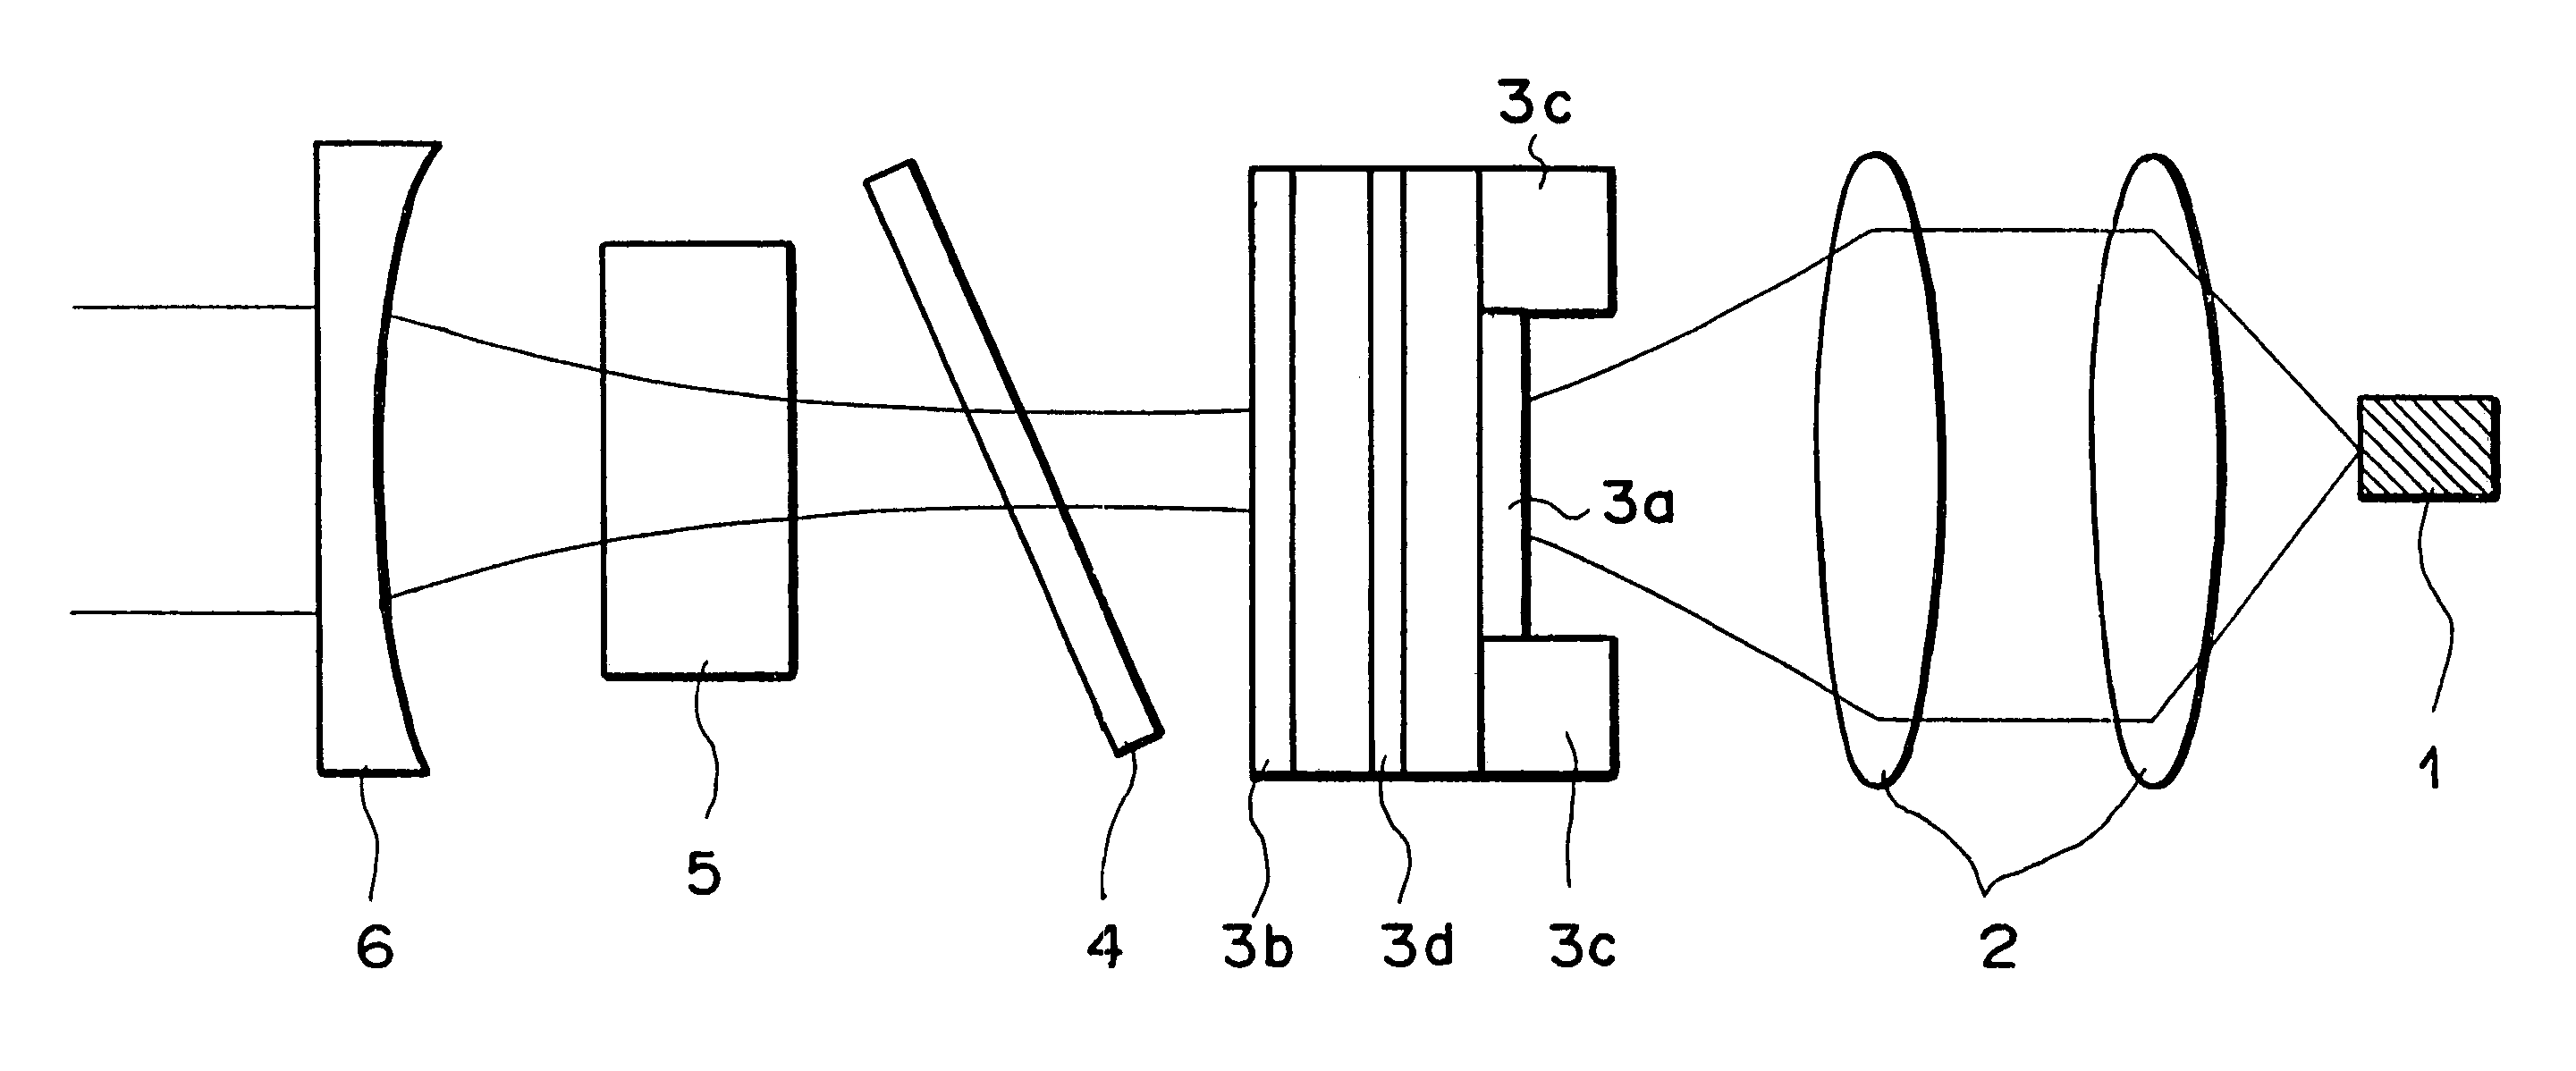 Wavelength conversion apparatus using semiconductor optical amplifying element for laser oscillation